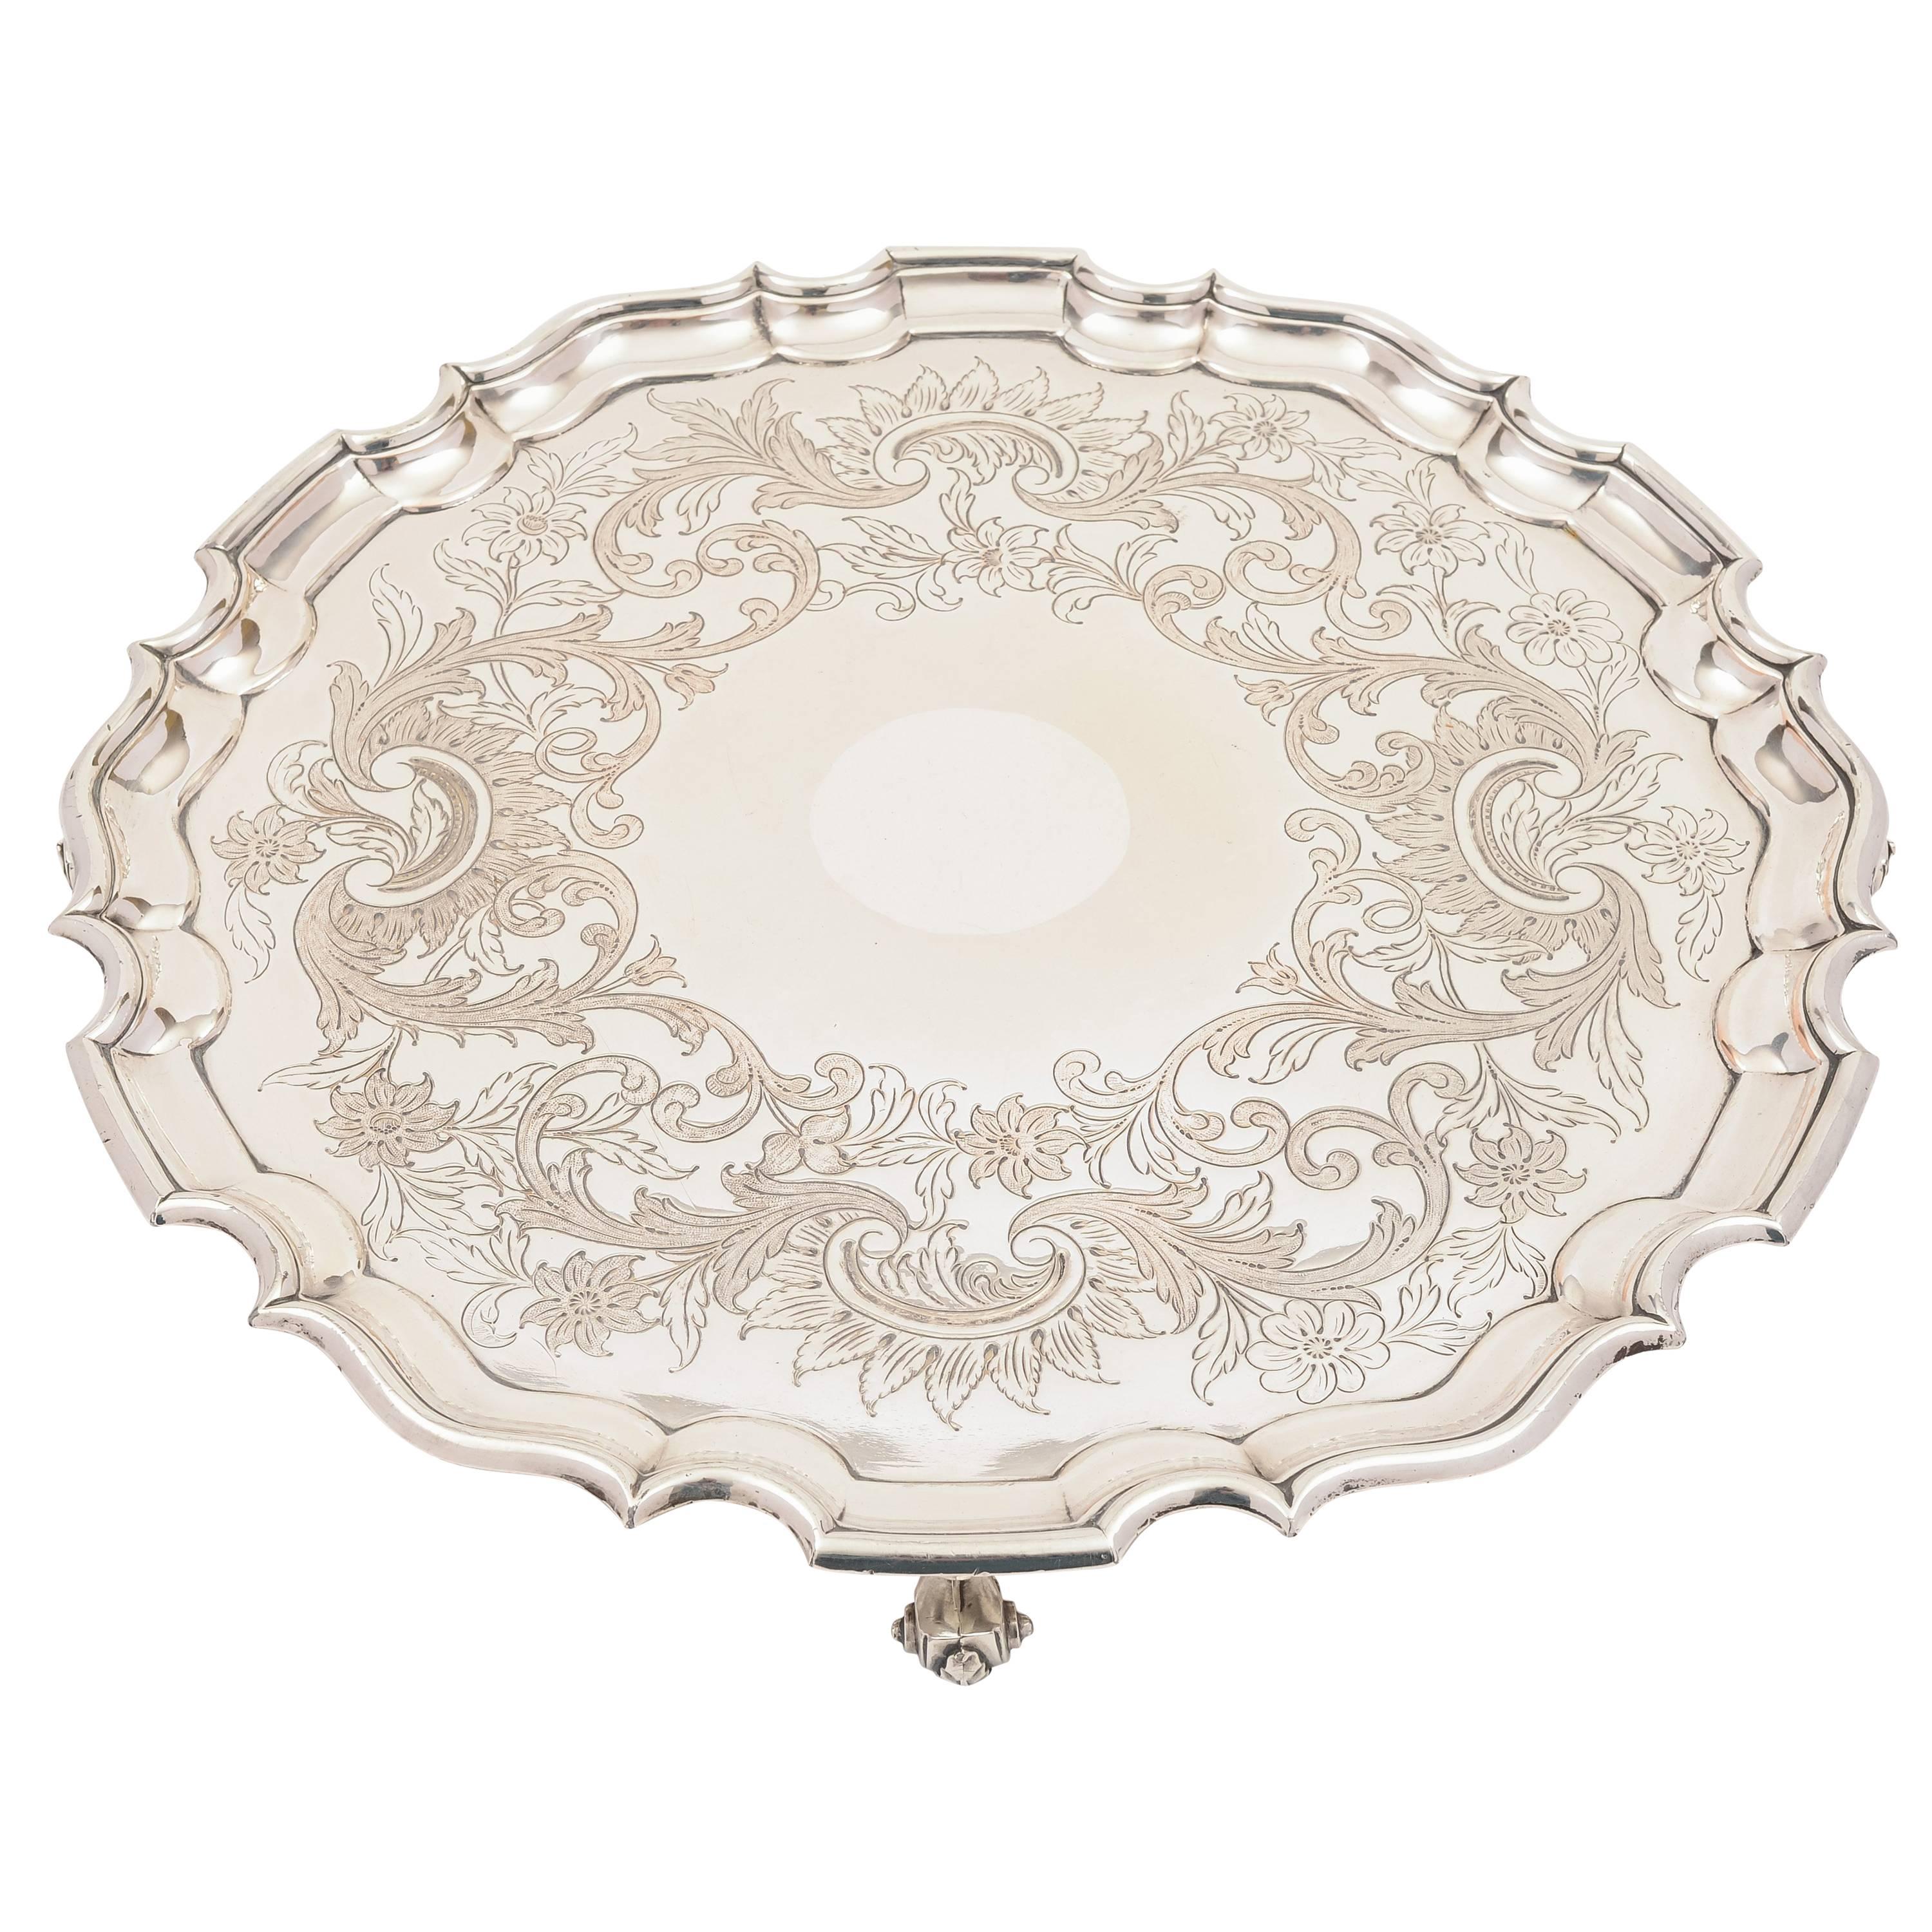 Large 19th Century Sheffield Plated Salver For Sale